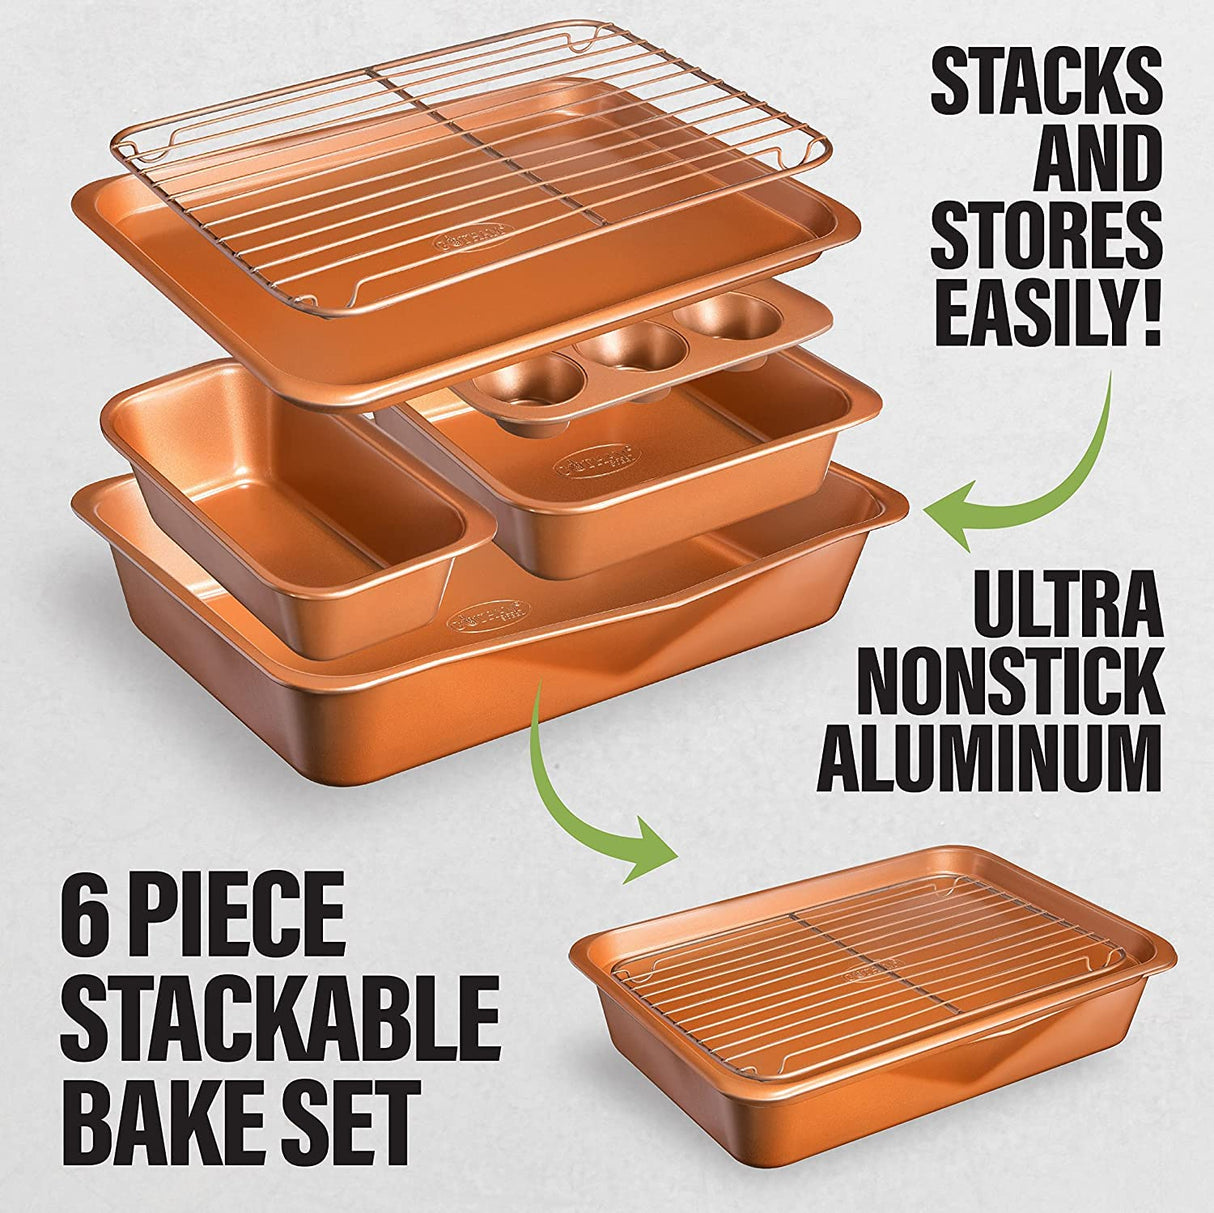 Gotham Steel 6 Pc Stackable Bakeware Set/Baking Pans Set Nonstick with Oven Pans + Baking Sheet Set and Wire Rack, Complete Baking Set for Kitchen, Oven/Dishwasher Safe, 100% Non Toxic…